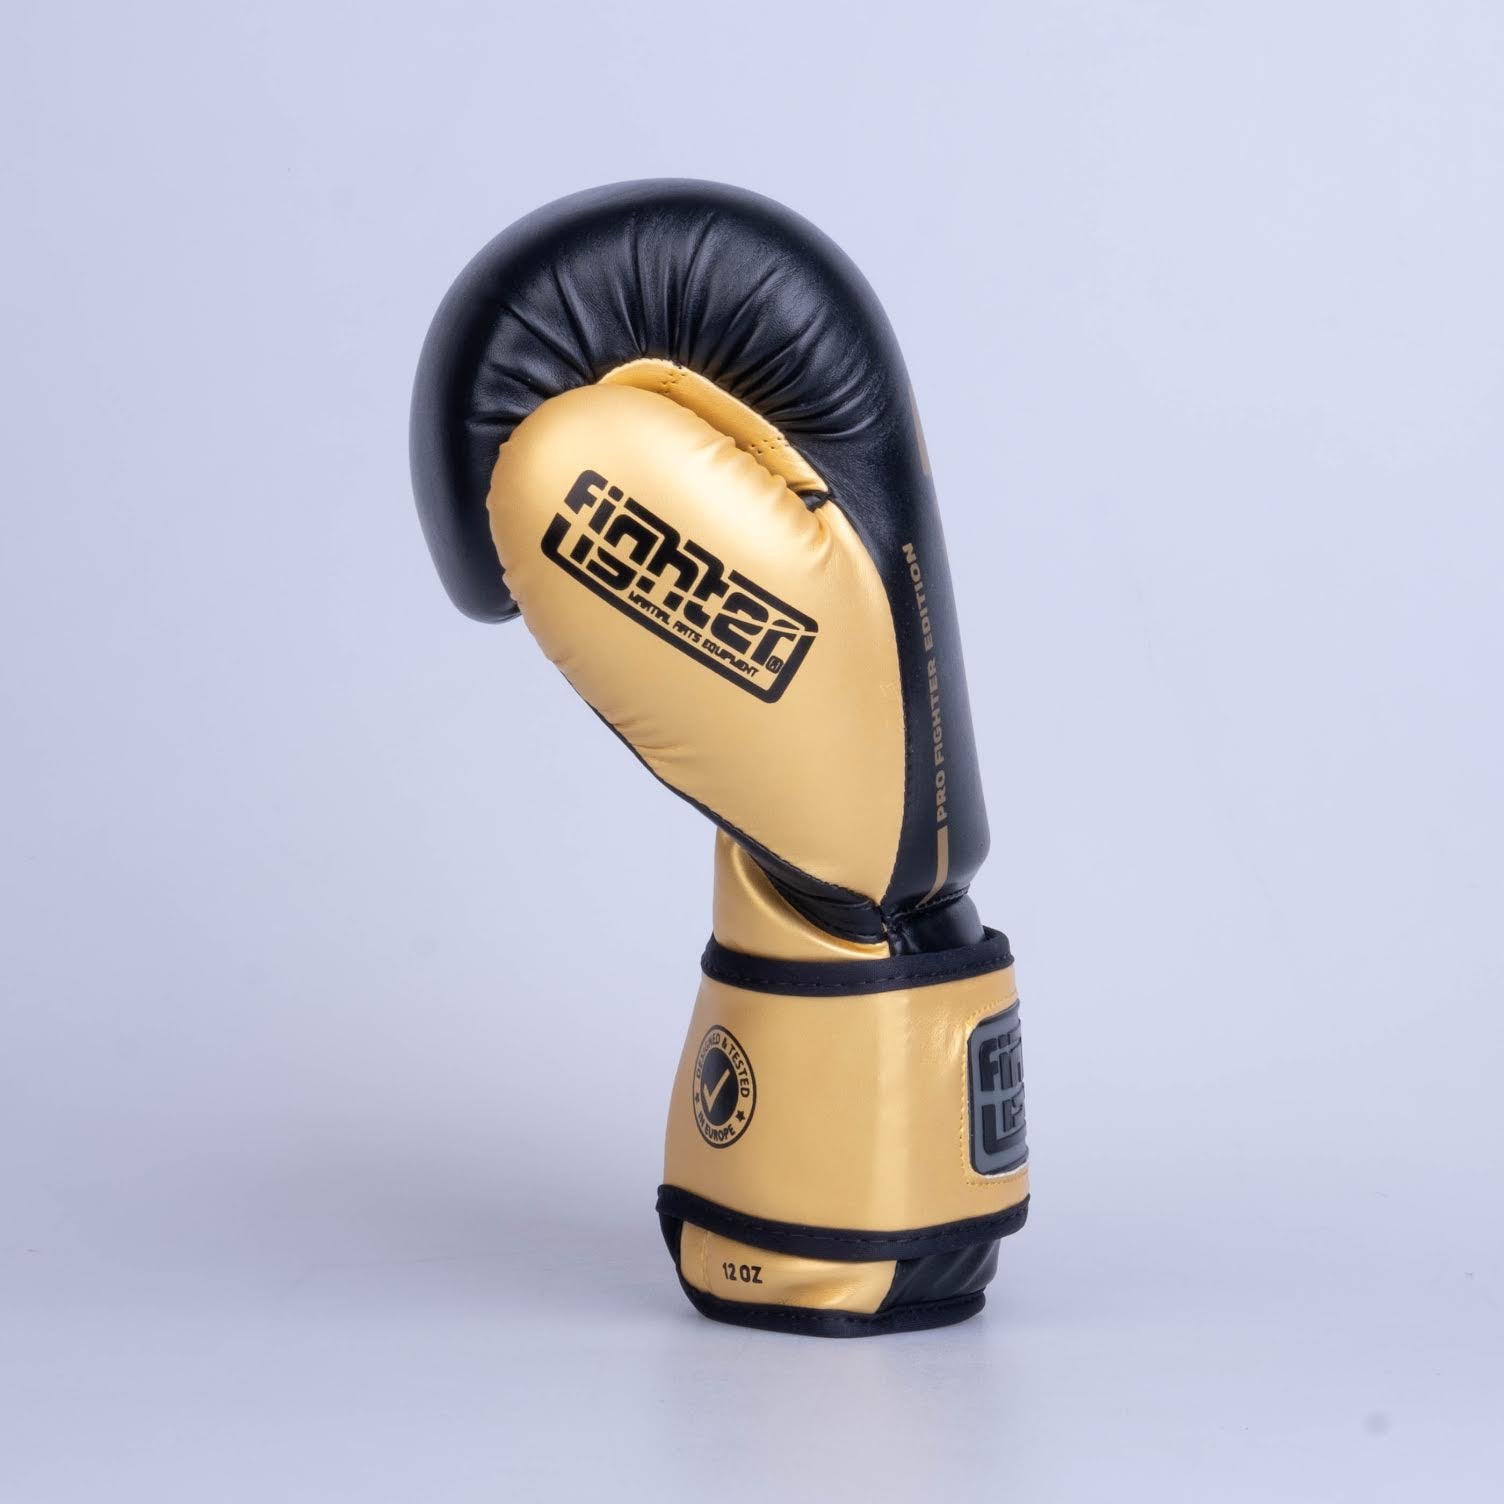 Fighter Boxing Gloves Training PU - black/gold, FBG-TRP-001